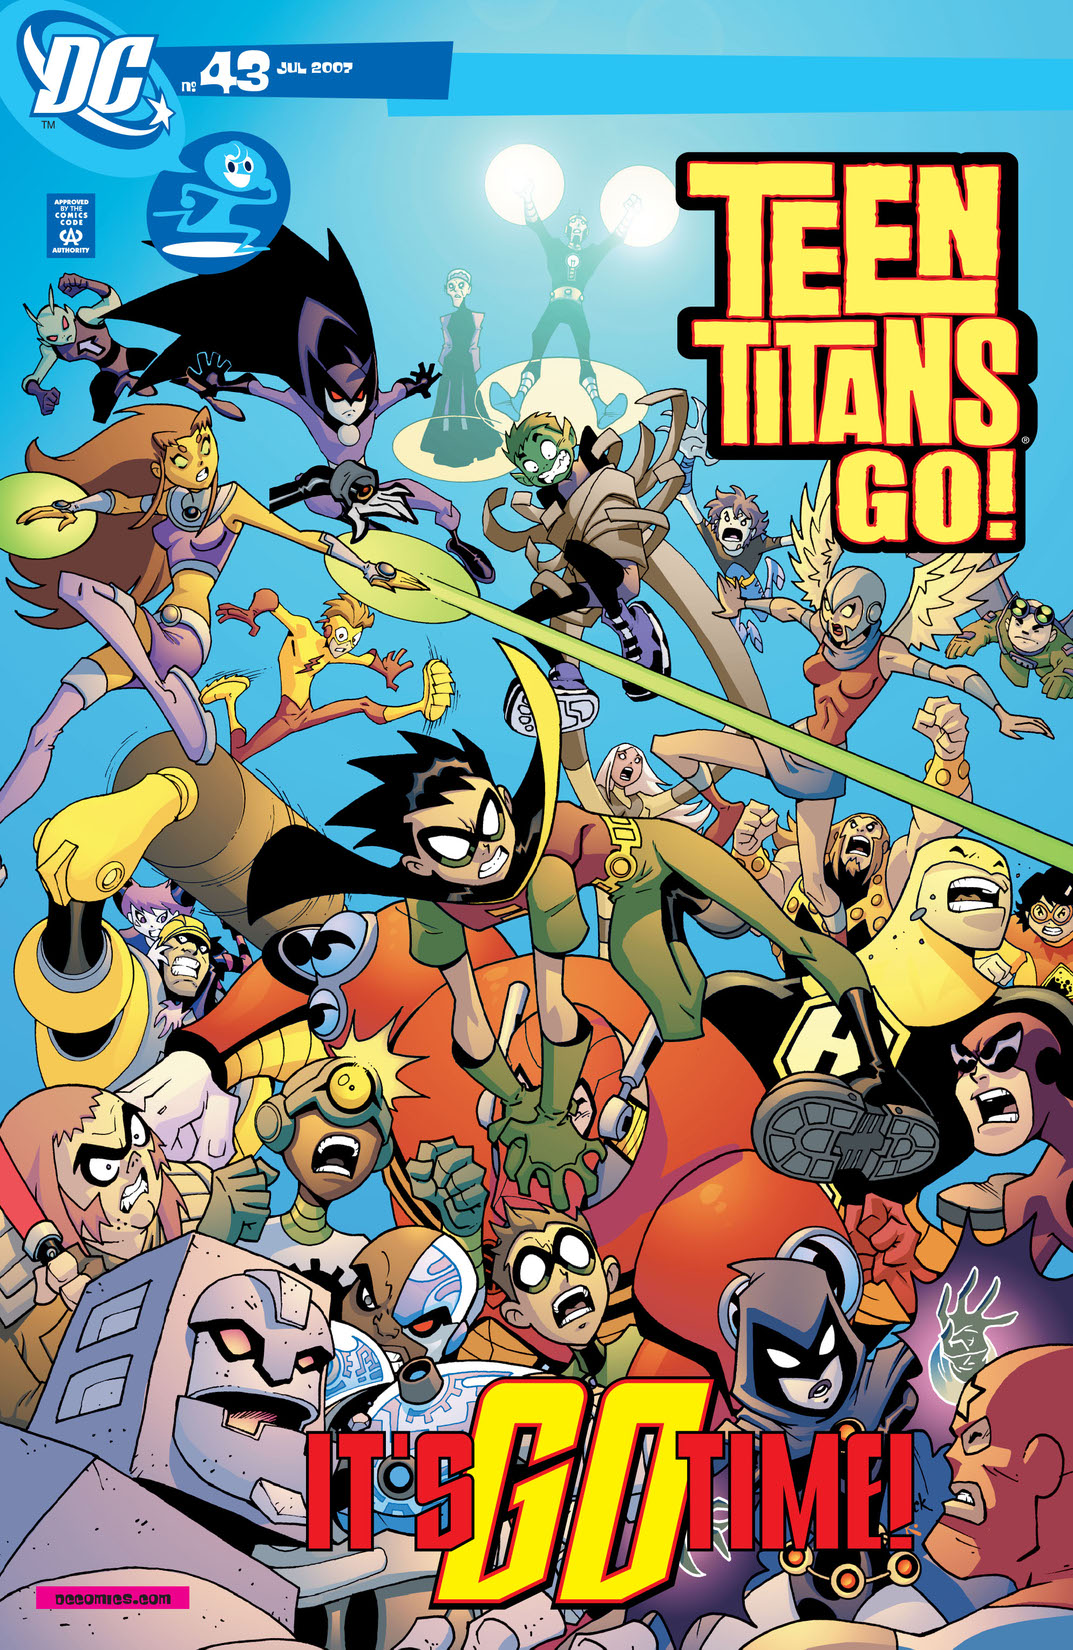 Teen Titans Go! (2003-) #43 preview images